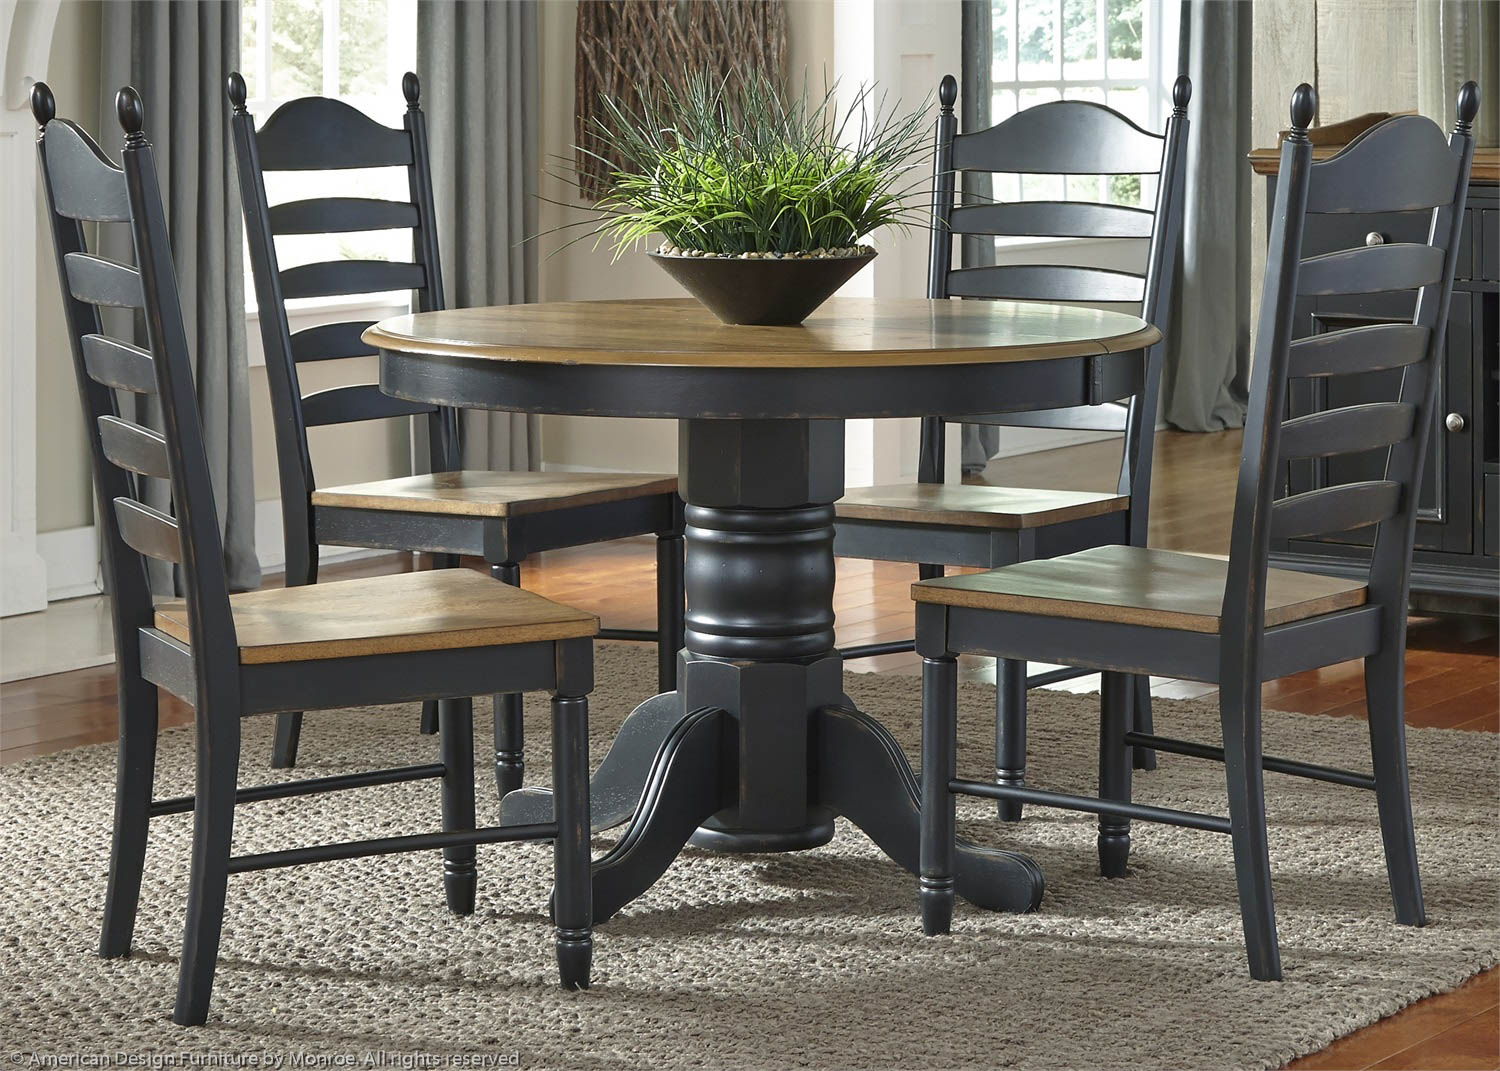 Milford Casual Table Pic 2 (Heading Pedestal Table)